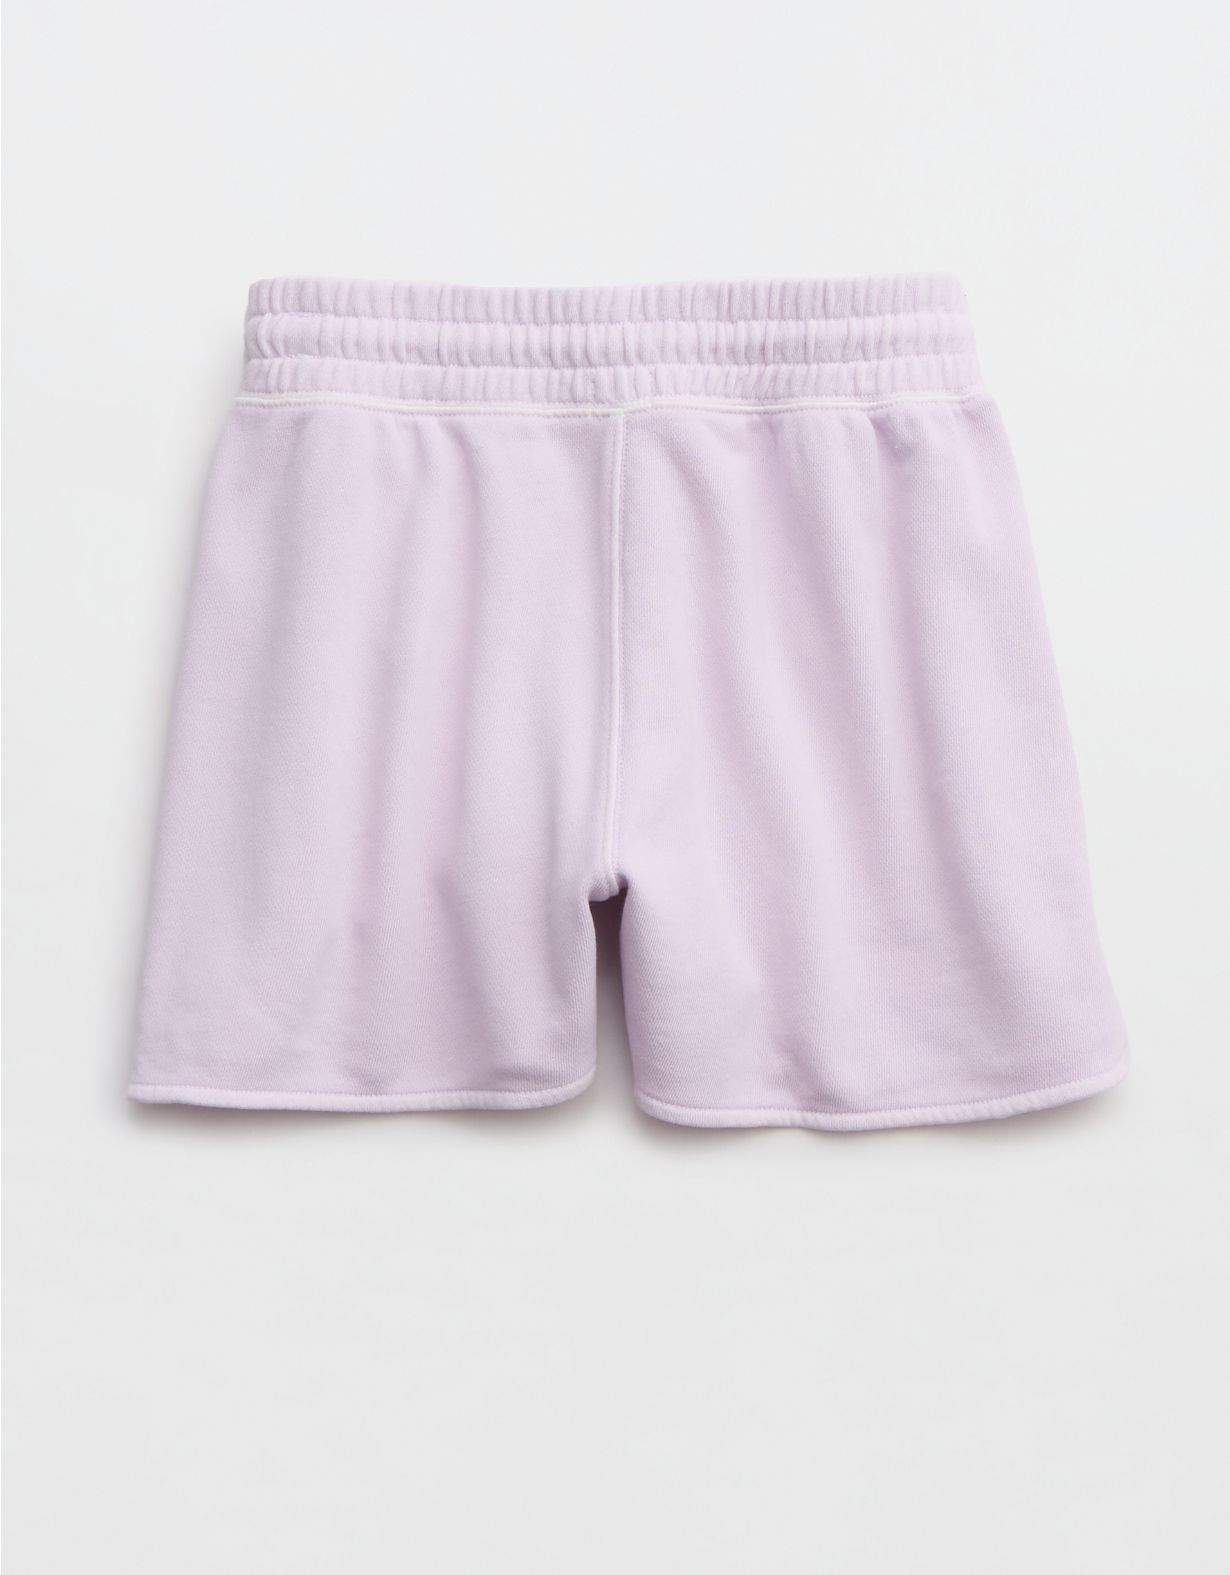 Aerie High Waisted REAL Short